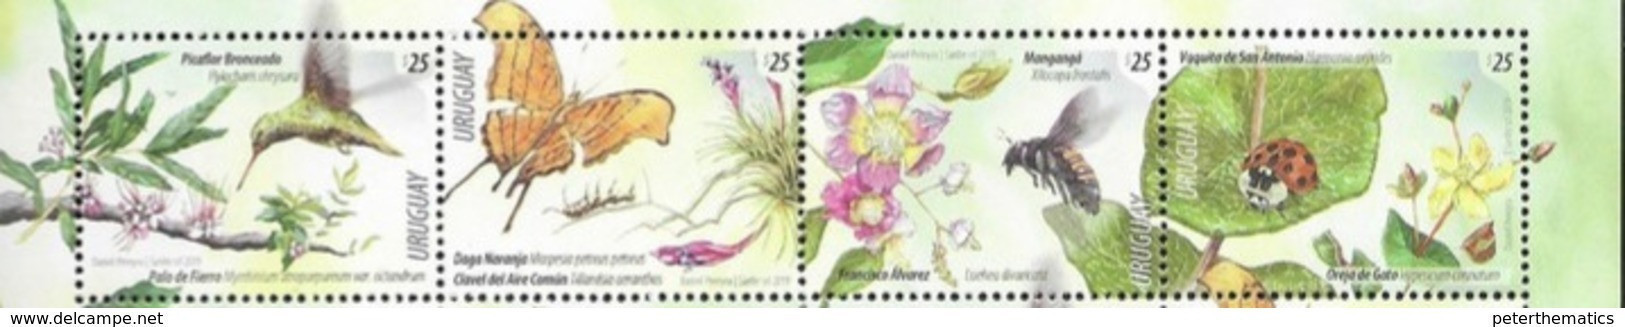 URUGUAY , 2019, MNH,  SPRING 2019, BIRDS, HUMMING BIRDS, INSECTS, BEES, BUTTERFLIES, LADYBUGS, 4v - Kolibries